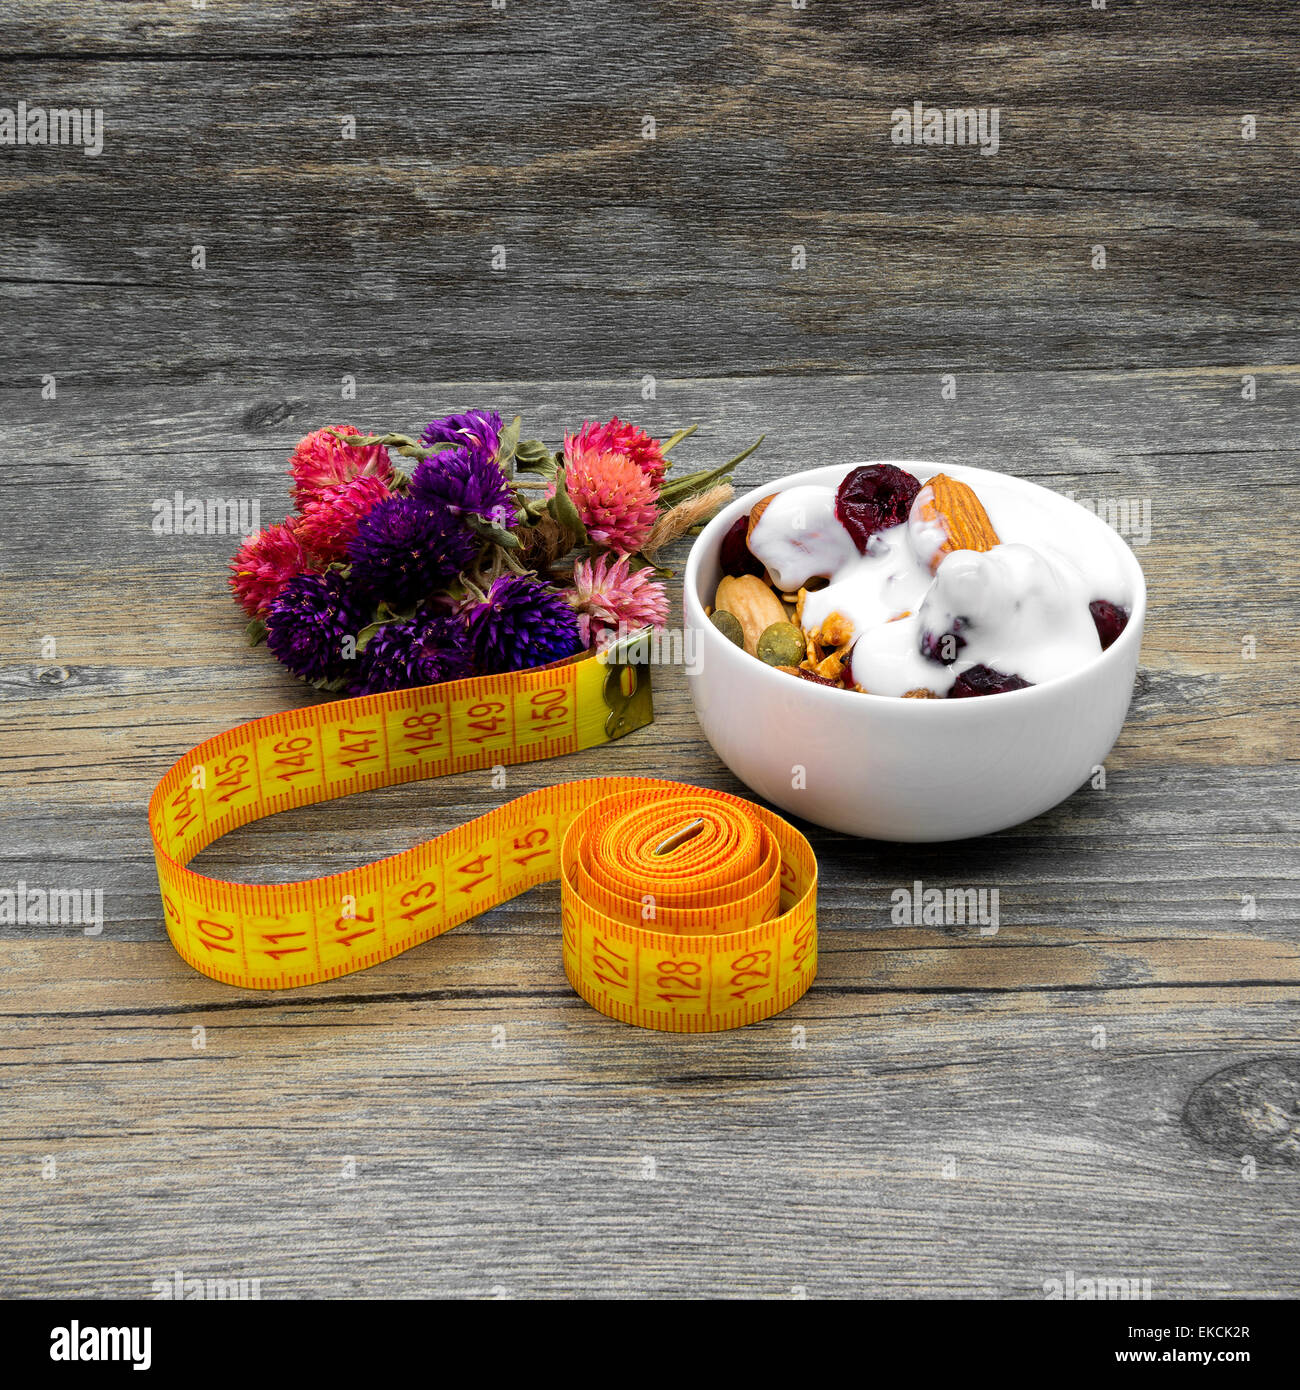 Centimeter and granola with yogurt on rustic wooden background. Stock Photo